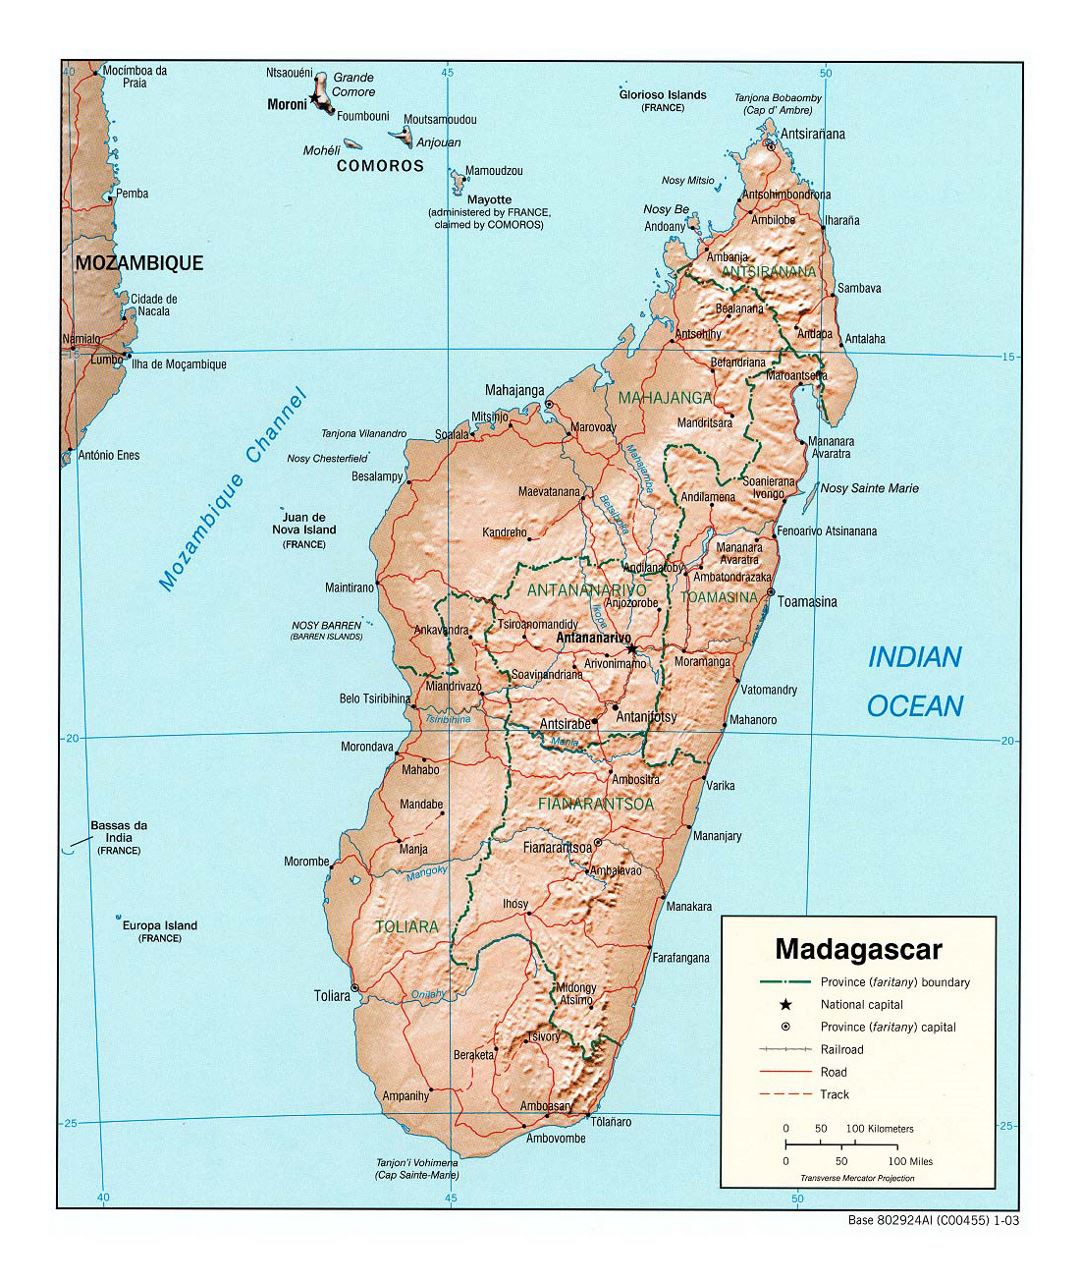 Detailed political and administrative map of Madagascar with relief, roads, railroads and major cities - 2003